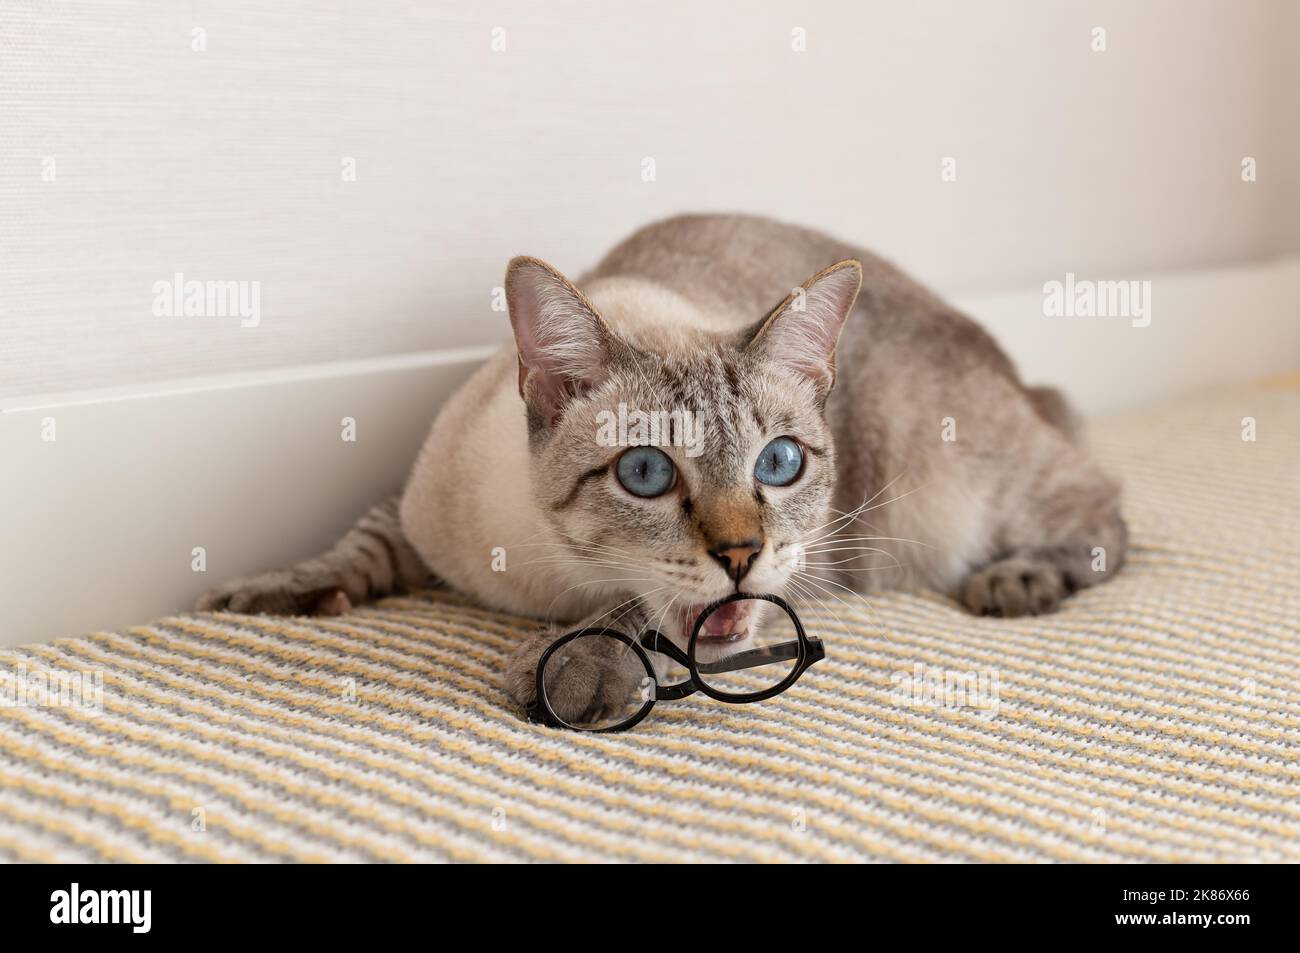 Playful purebred cat biting glasses and looking at the camera Stock Photo